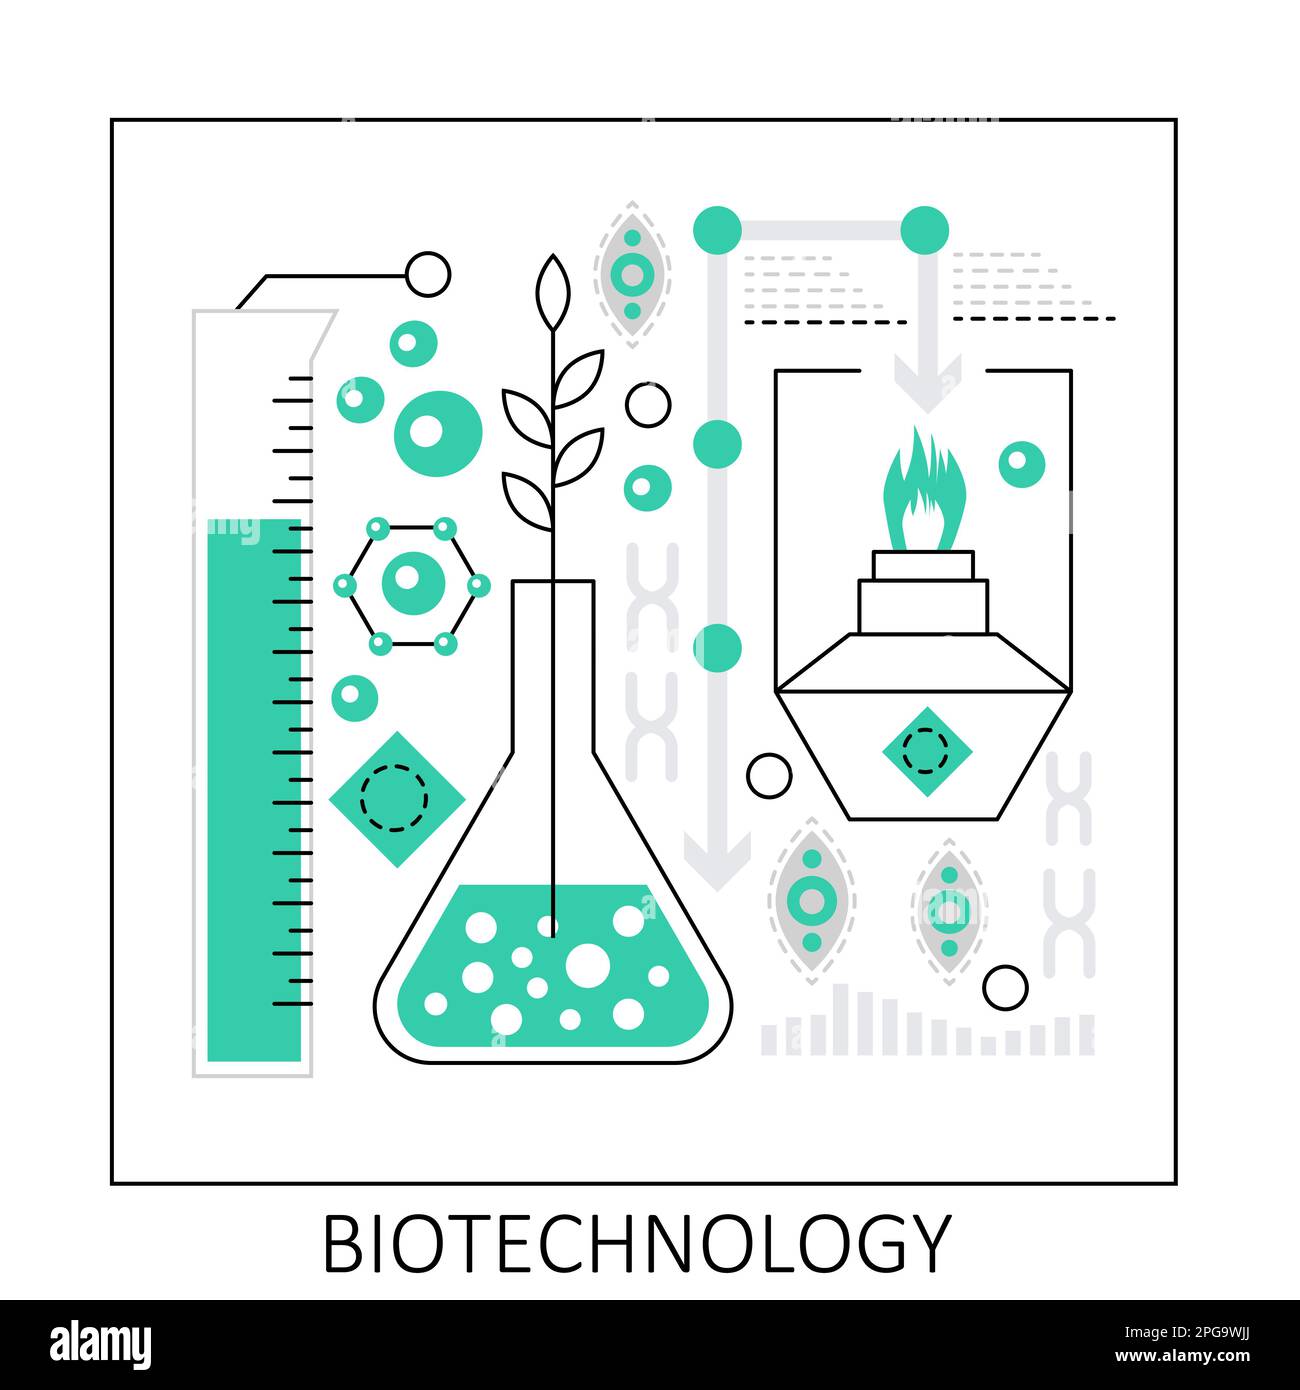 Biotechnology science. Biomedical research laboratory, biotech experiment vector illustration Stock Vector